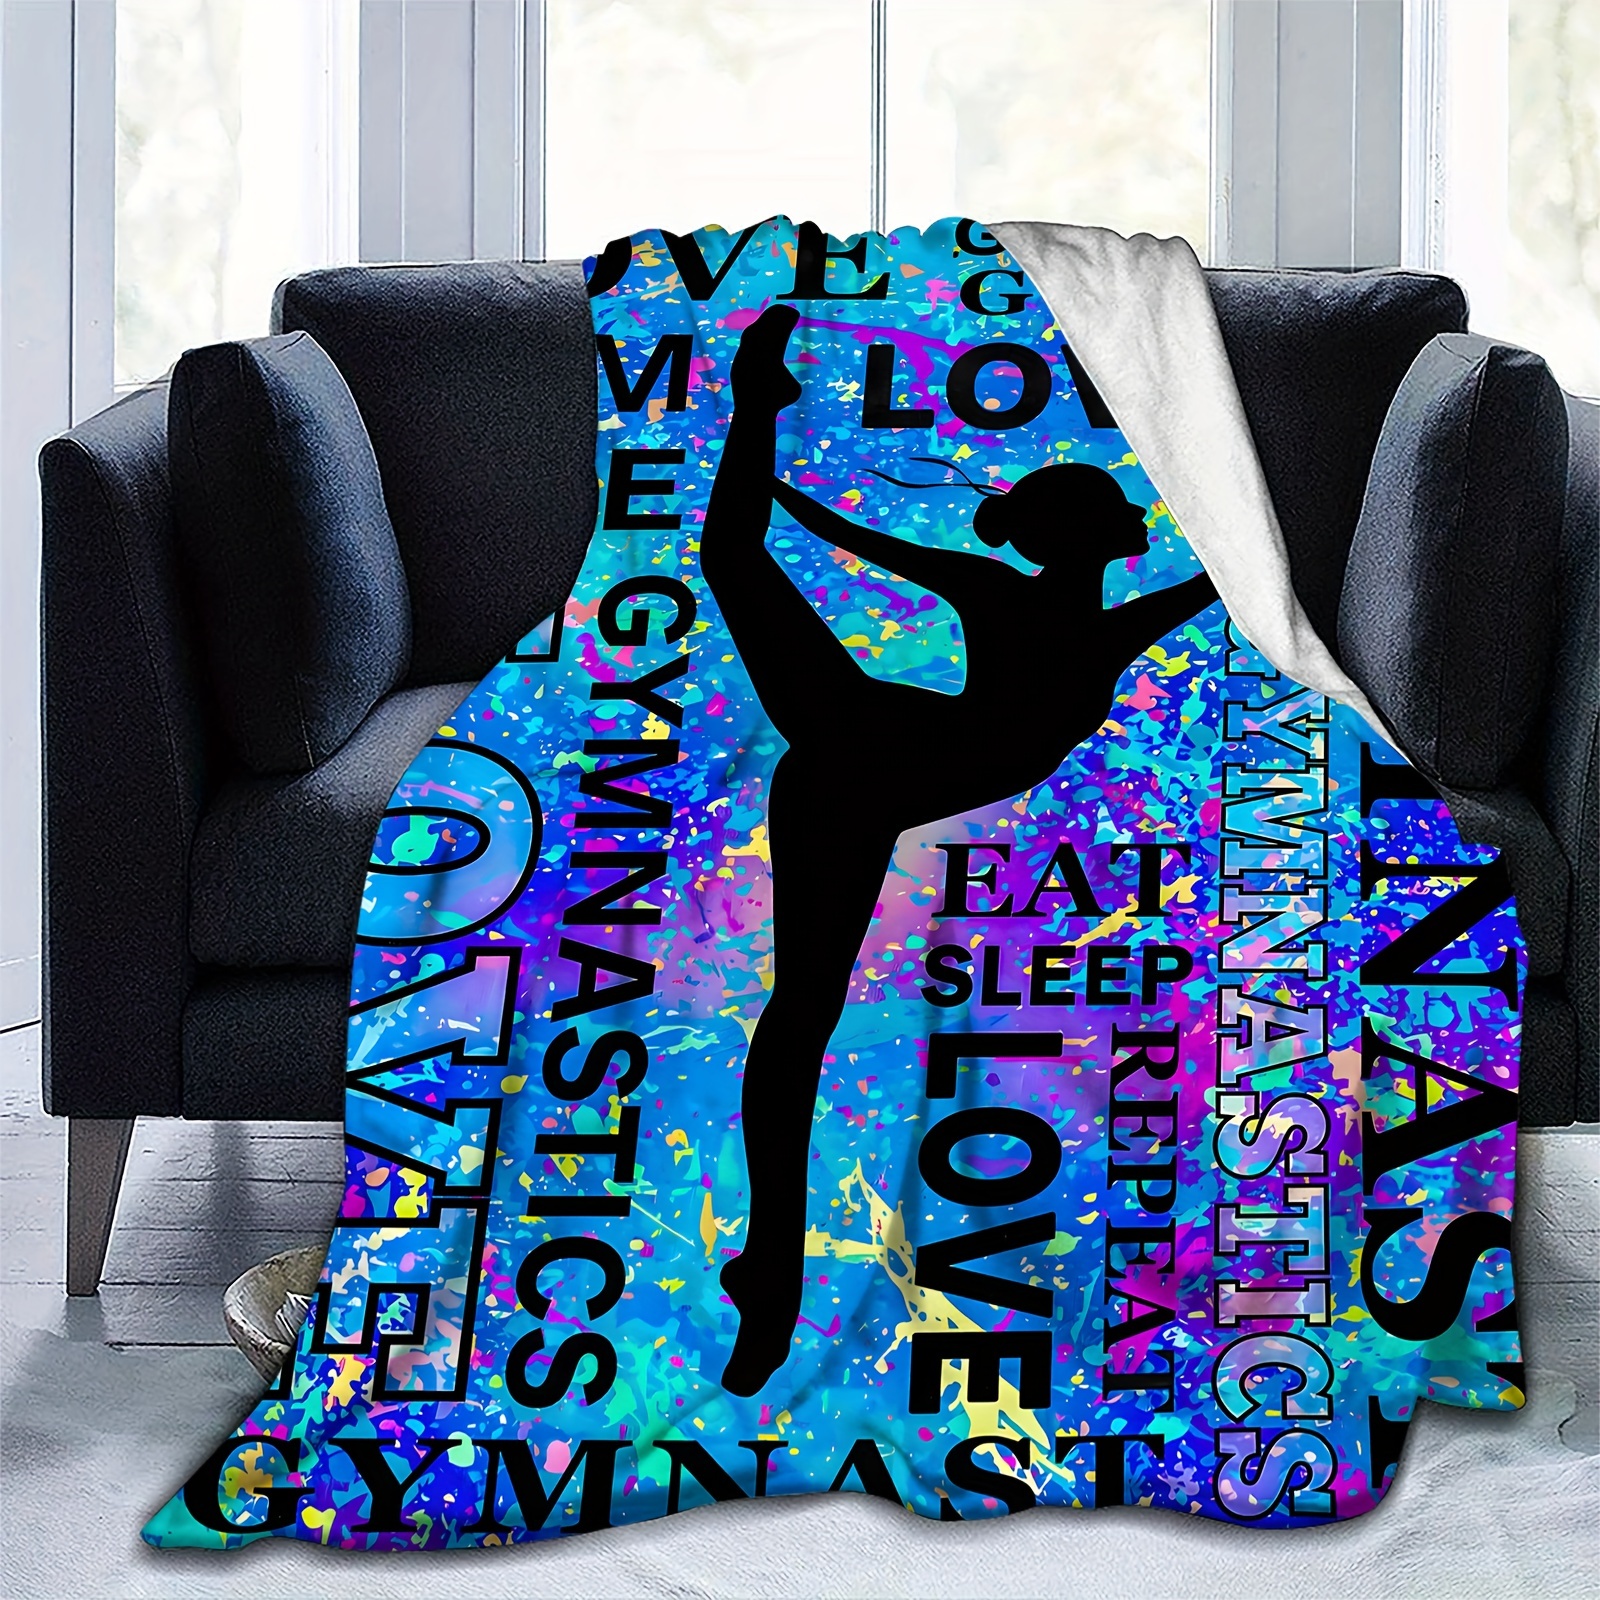 Gymnastics Gifts Blanket 50x40 - Gymnastic Gifts for Girls - Gymnastics  Room Decor - Gymnastics Party Decorations - Girls Gymnastics Gifts 